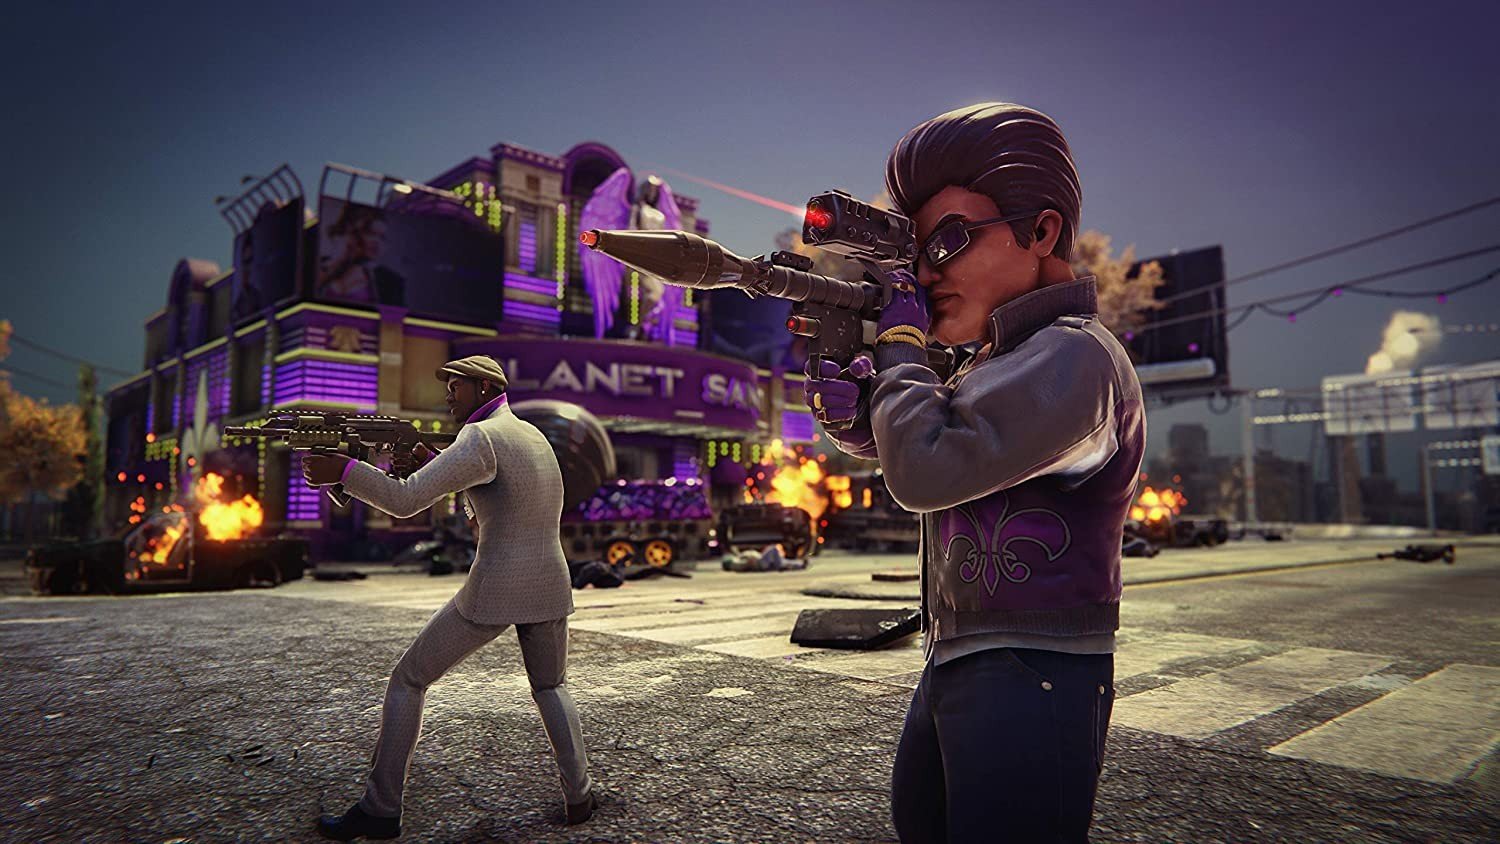 Saints Row 3 Remastered, Saints Row 2020, XONE, Xbox One, Europe, PS4, PlayStation 4, Release Date, Gameplay, price, pre-order now, screenshots, features, trailer, Saints Row: The Third Remastered, Deep Silver, Volition, Sperasoft, Saints Row 3 Mastered